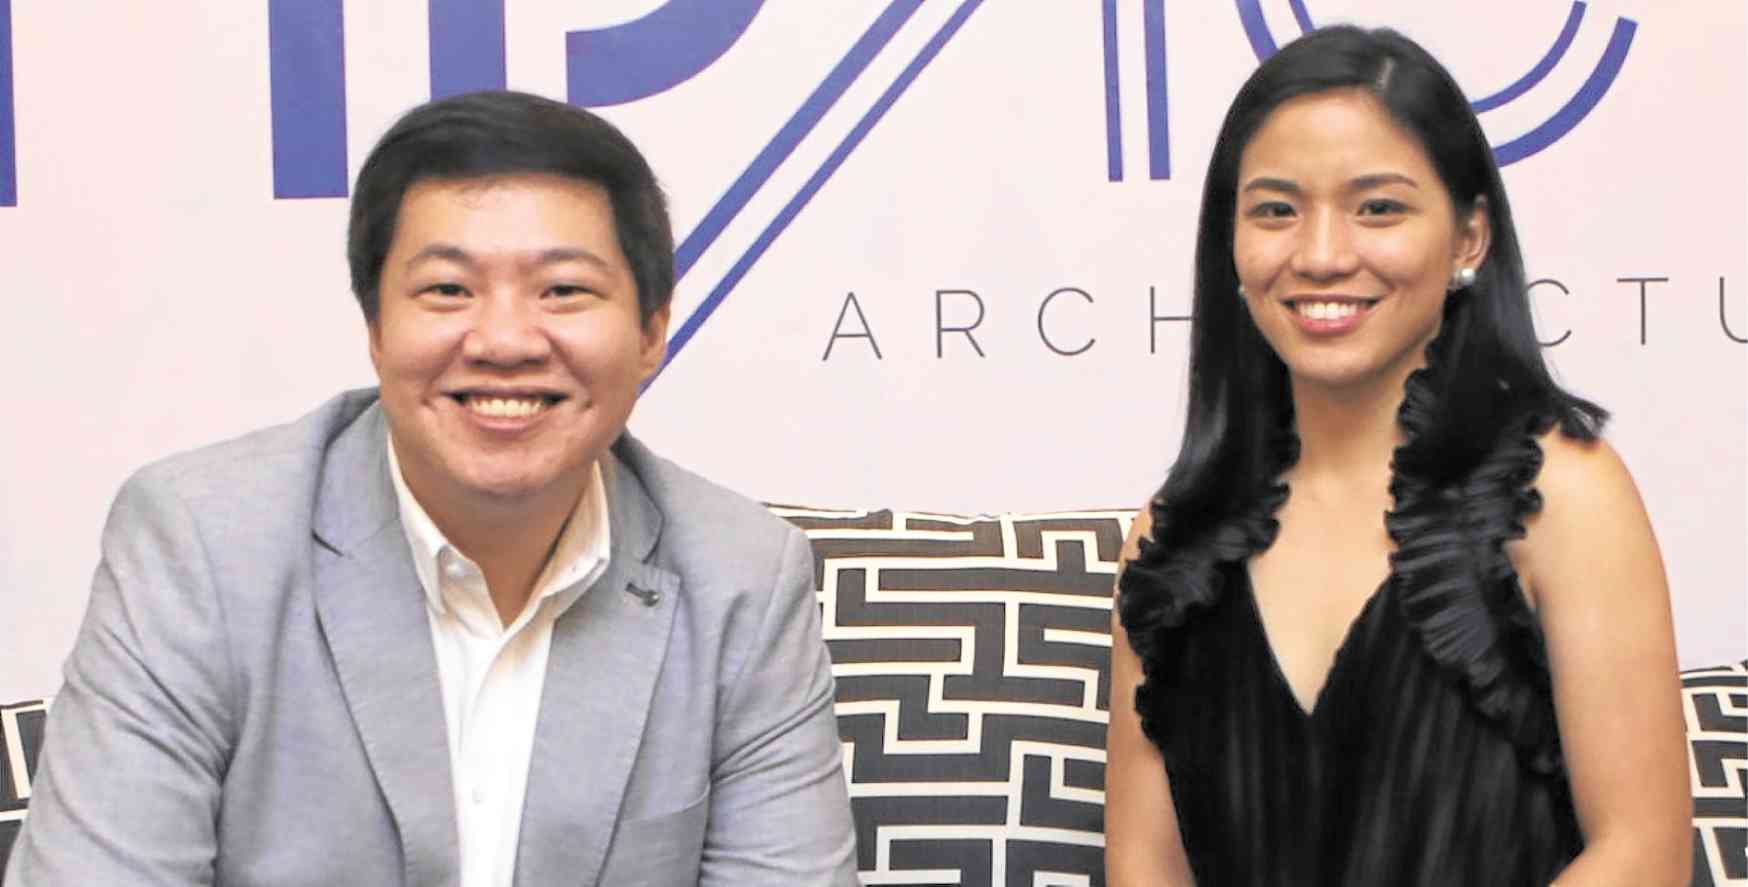 Why is Philippine architecture lagging behind?